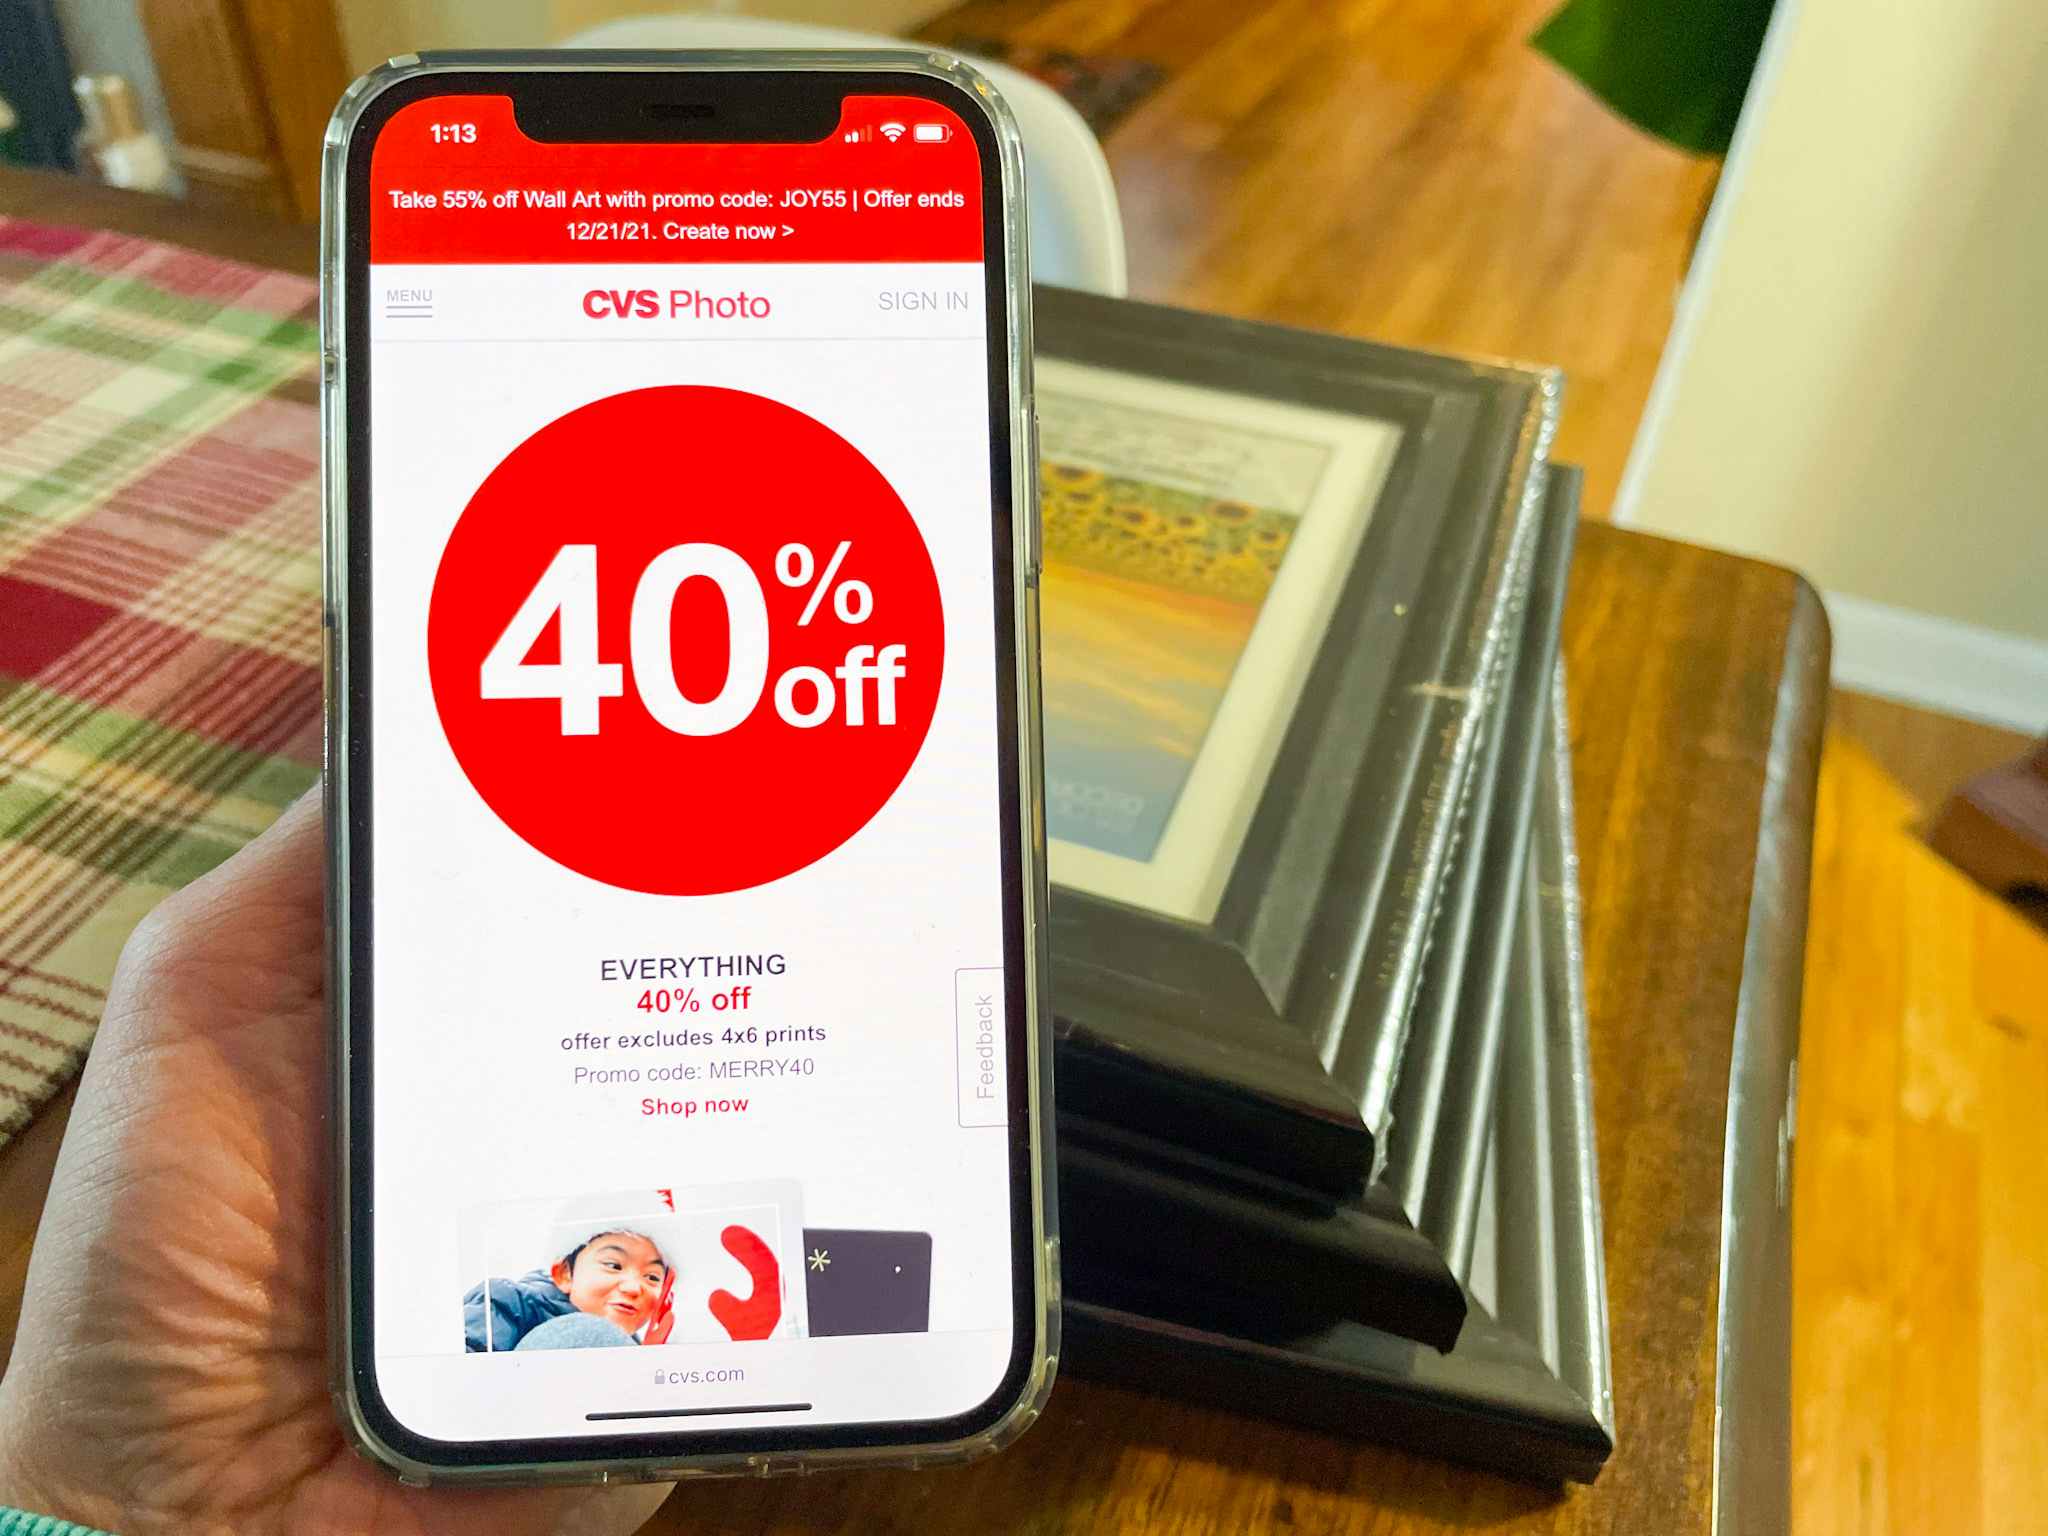 CVS photo coupon codes pulled up on a phone near picture frames